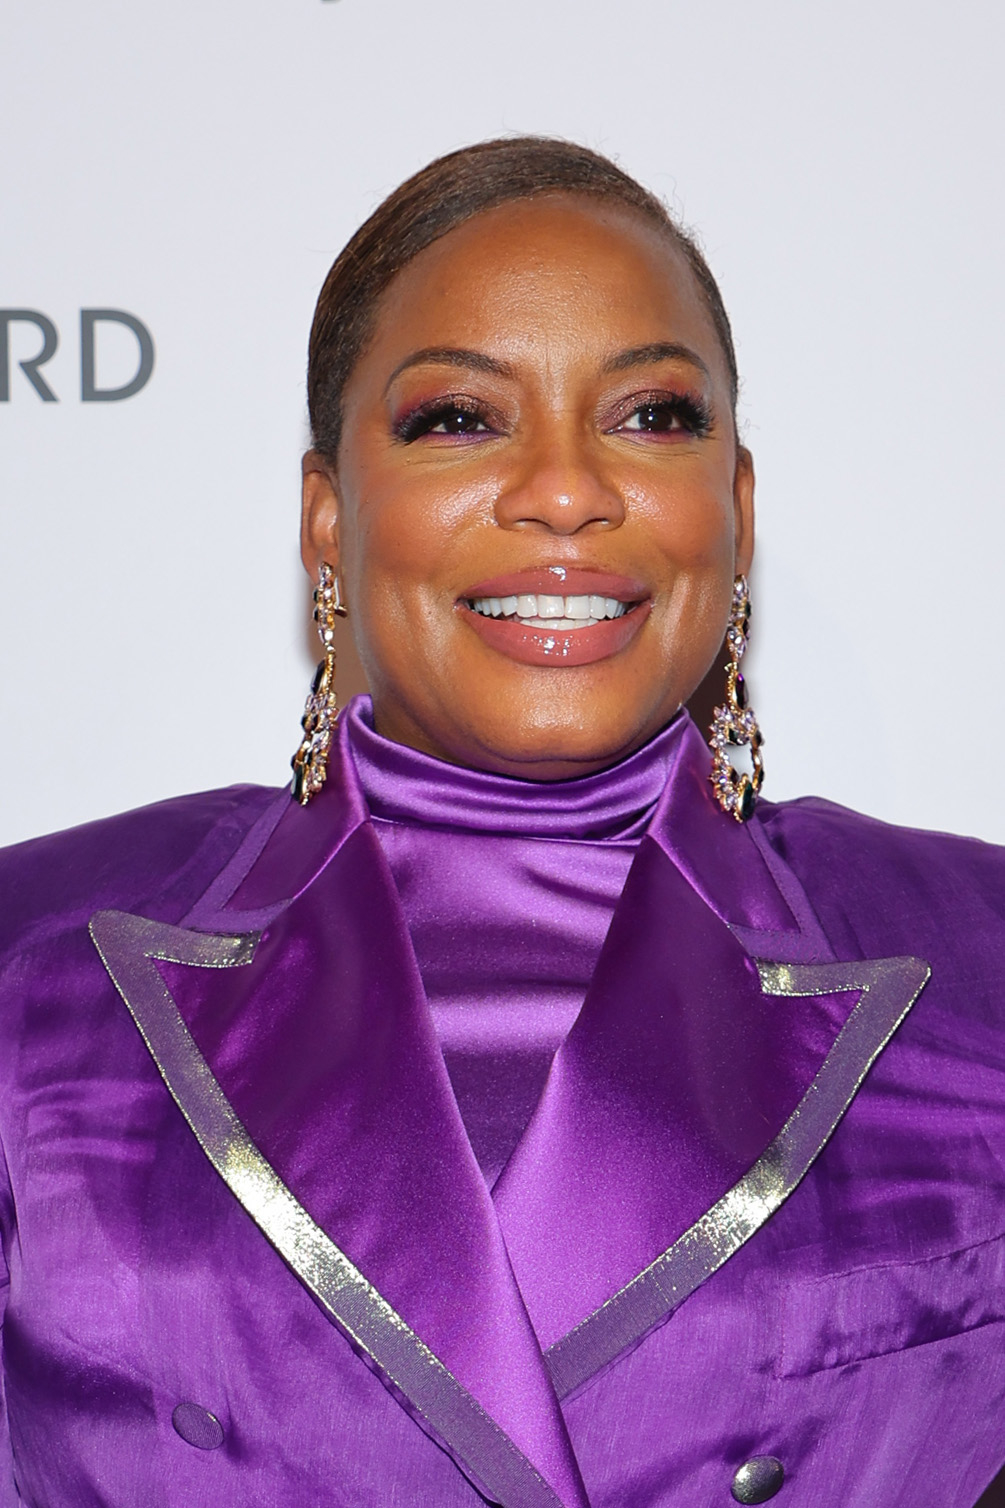 Woman in a satin purple suit with a turtleneck blouse, smiling at an event